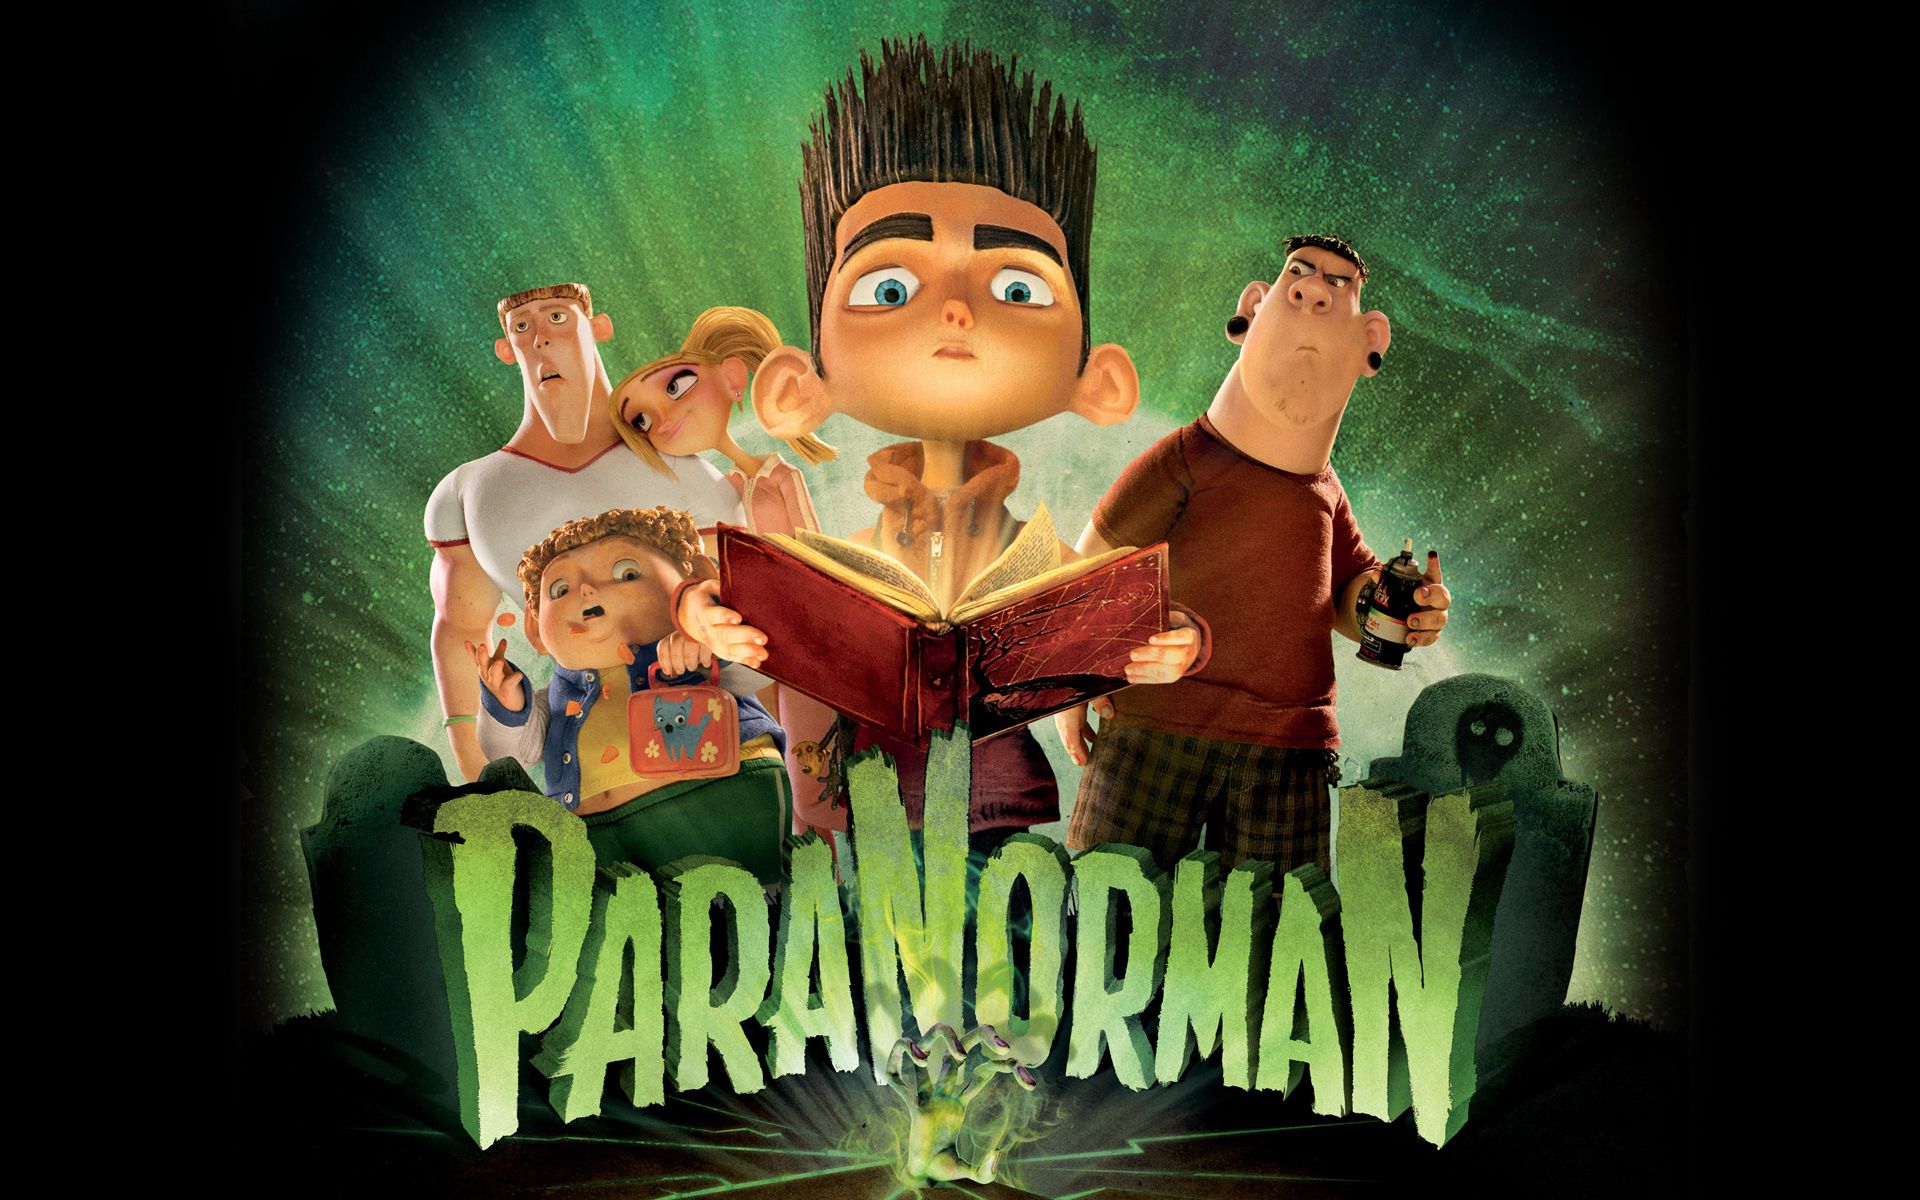 Paranorman 4K wallpaper for your desktop or mobile screen free and easy to download